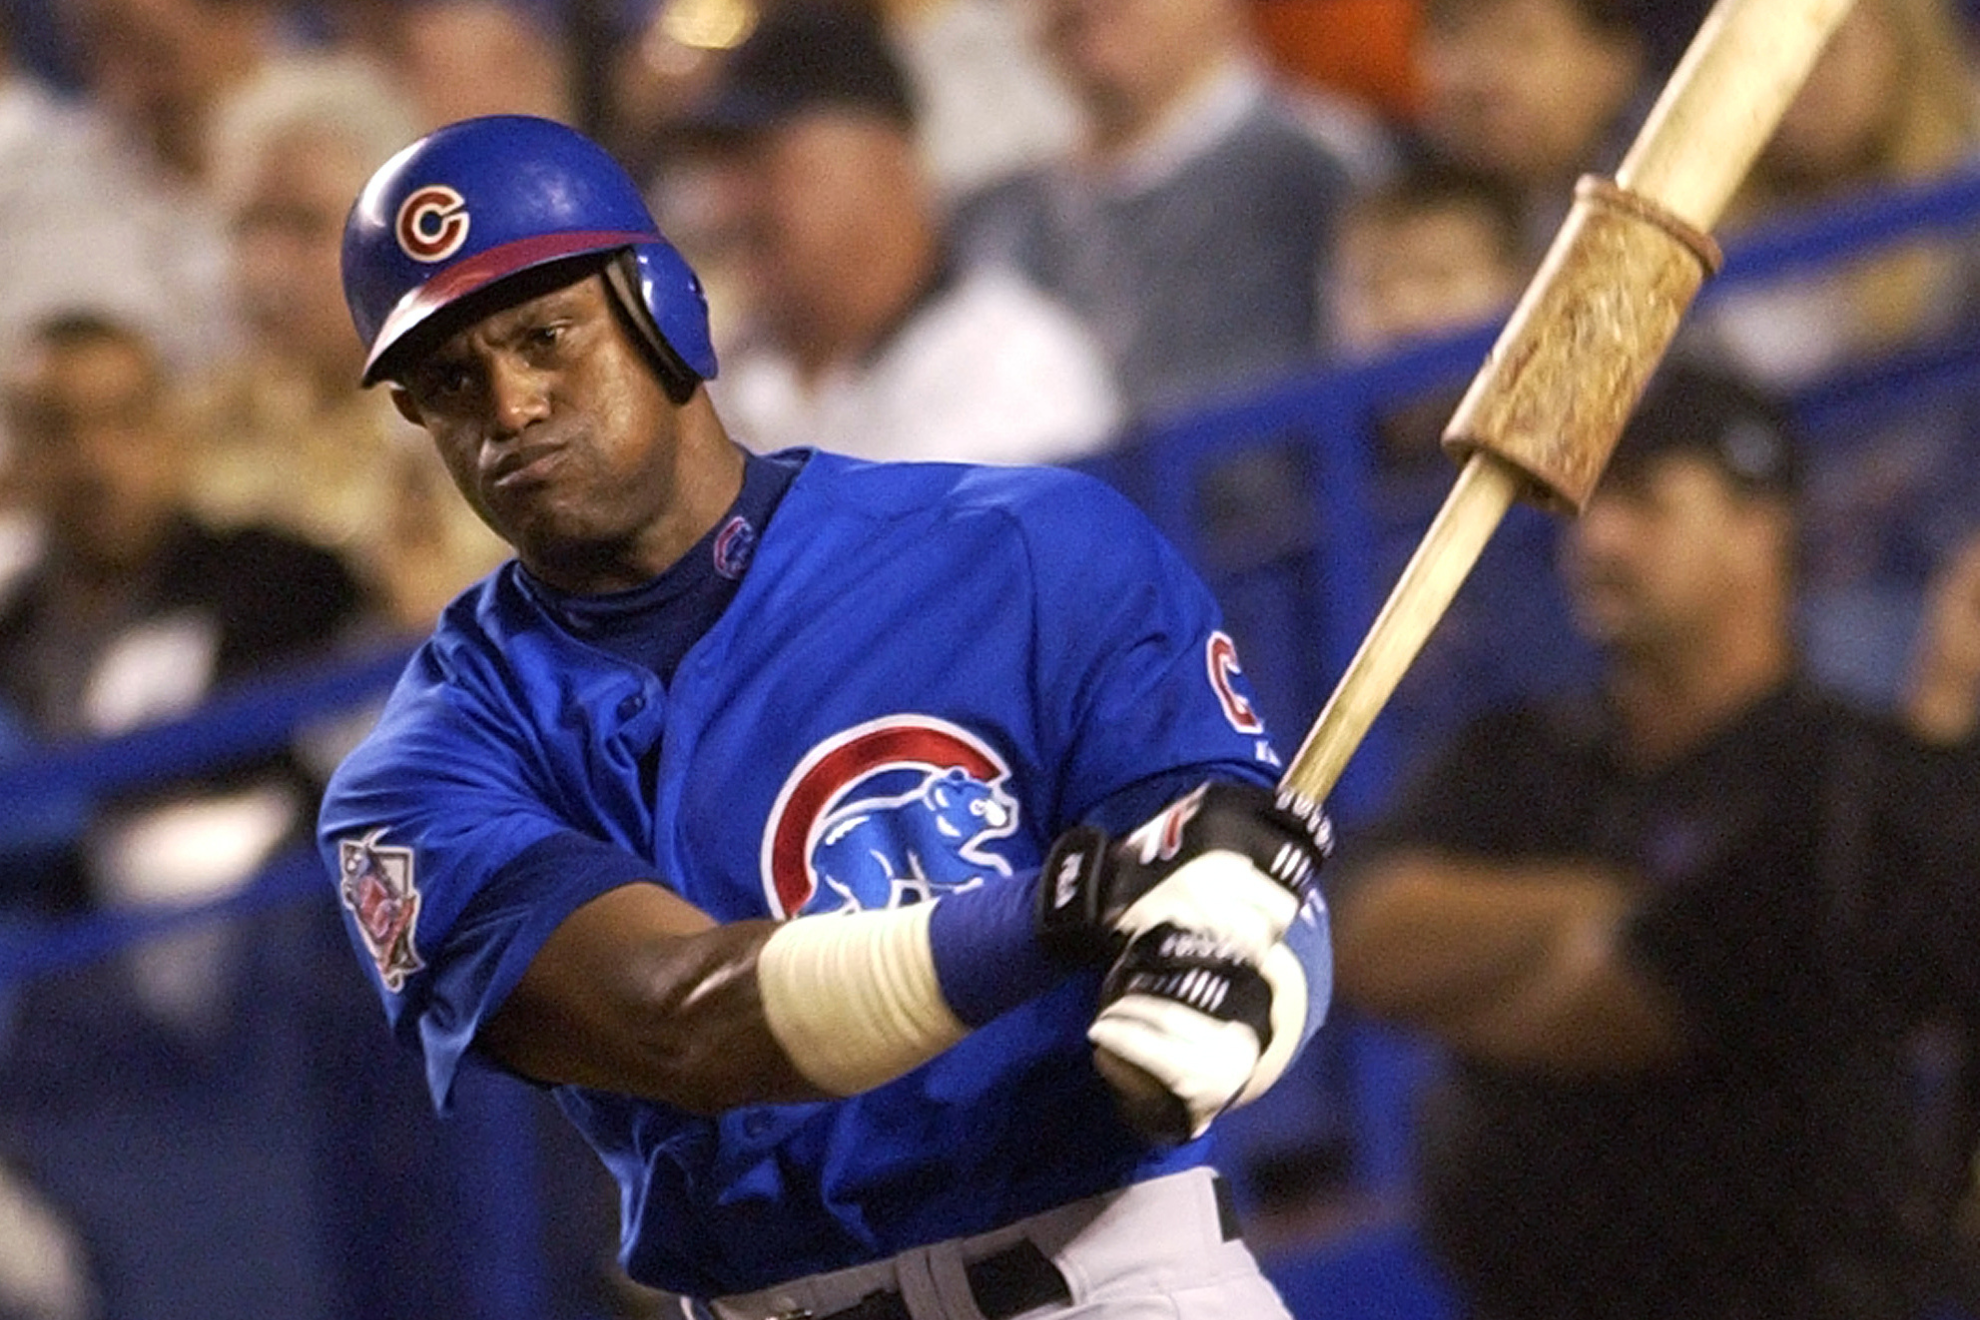 Sammy Sosa was one of the best home run hitters ever.